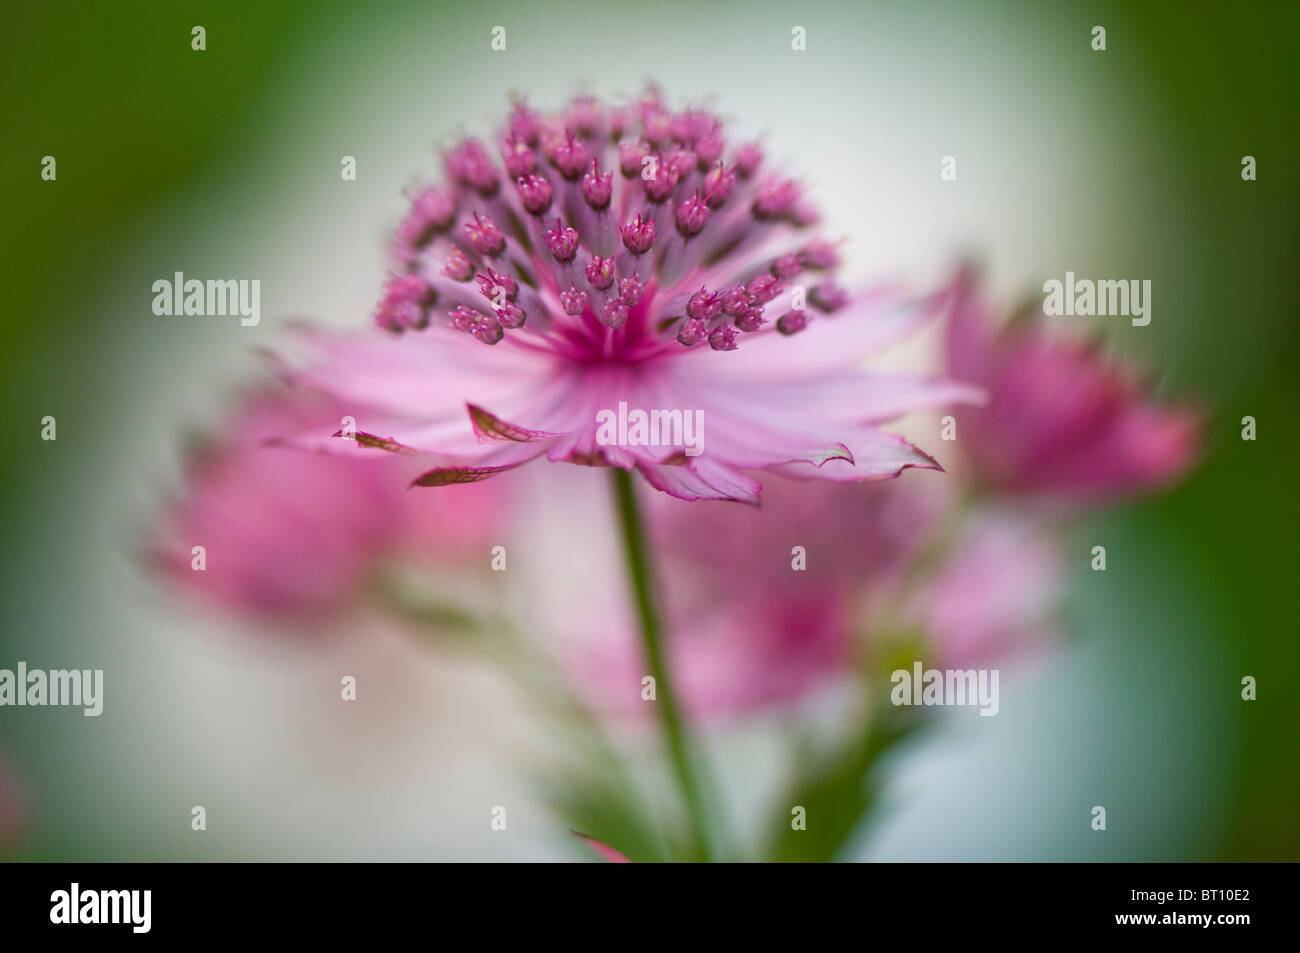 Close-up image of the beautiful summer flowering Astrantia major flower commonly known as Masterwort, image taken against a soft background. Stock Photo